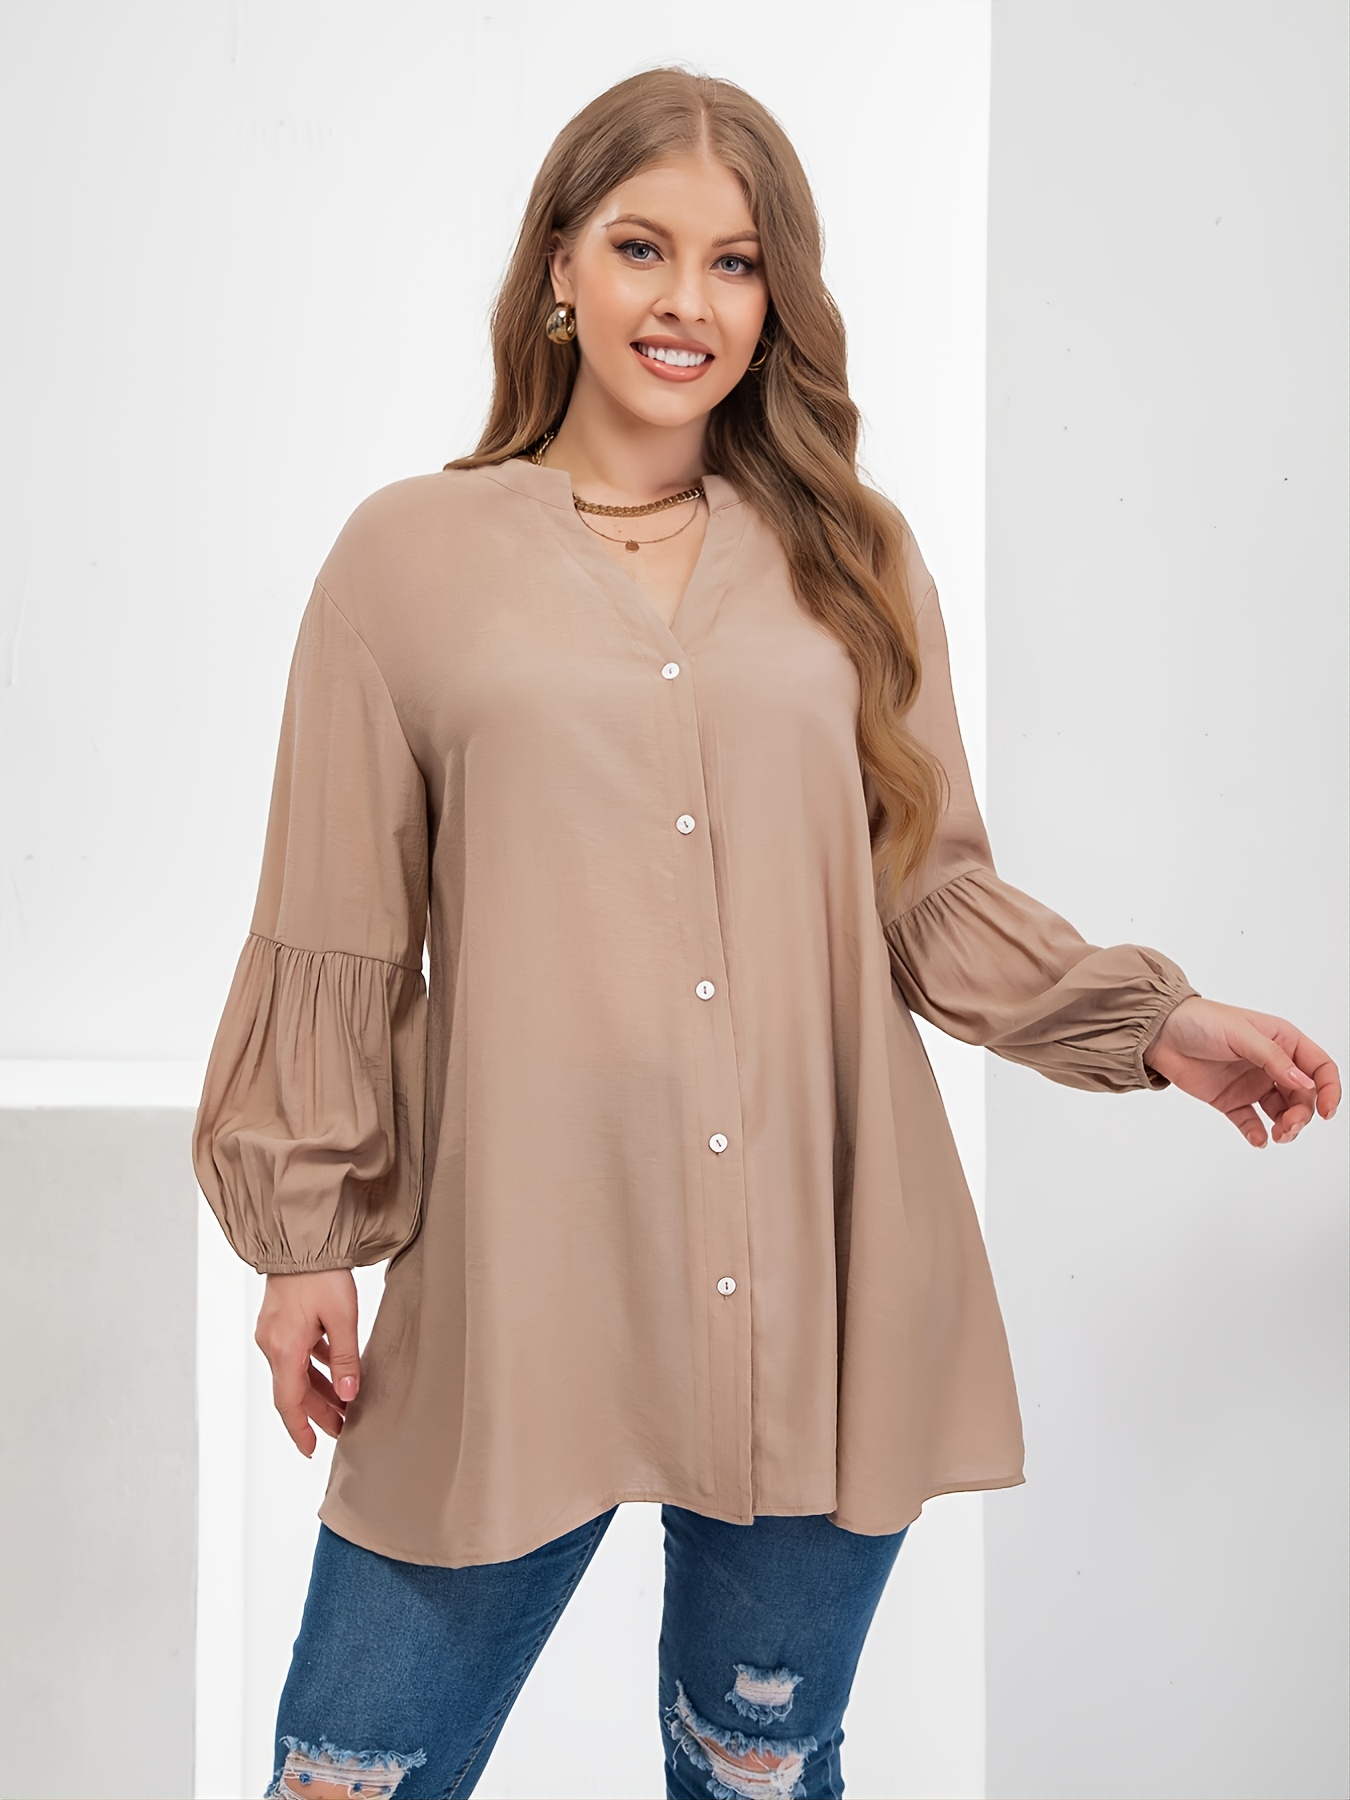 TIYOMI Plus Size Womens 5X Tops Solid Color Long Sleeve Oversized Caramel  Tees Loose fit Shirts Fall Winter Tunic 5XL 26W 28W